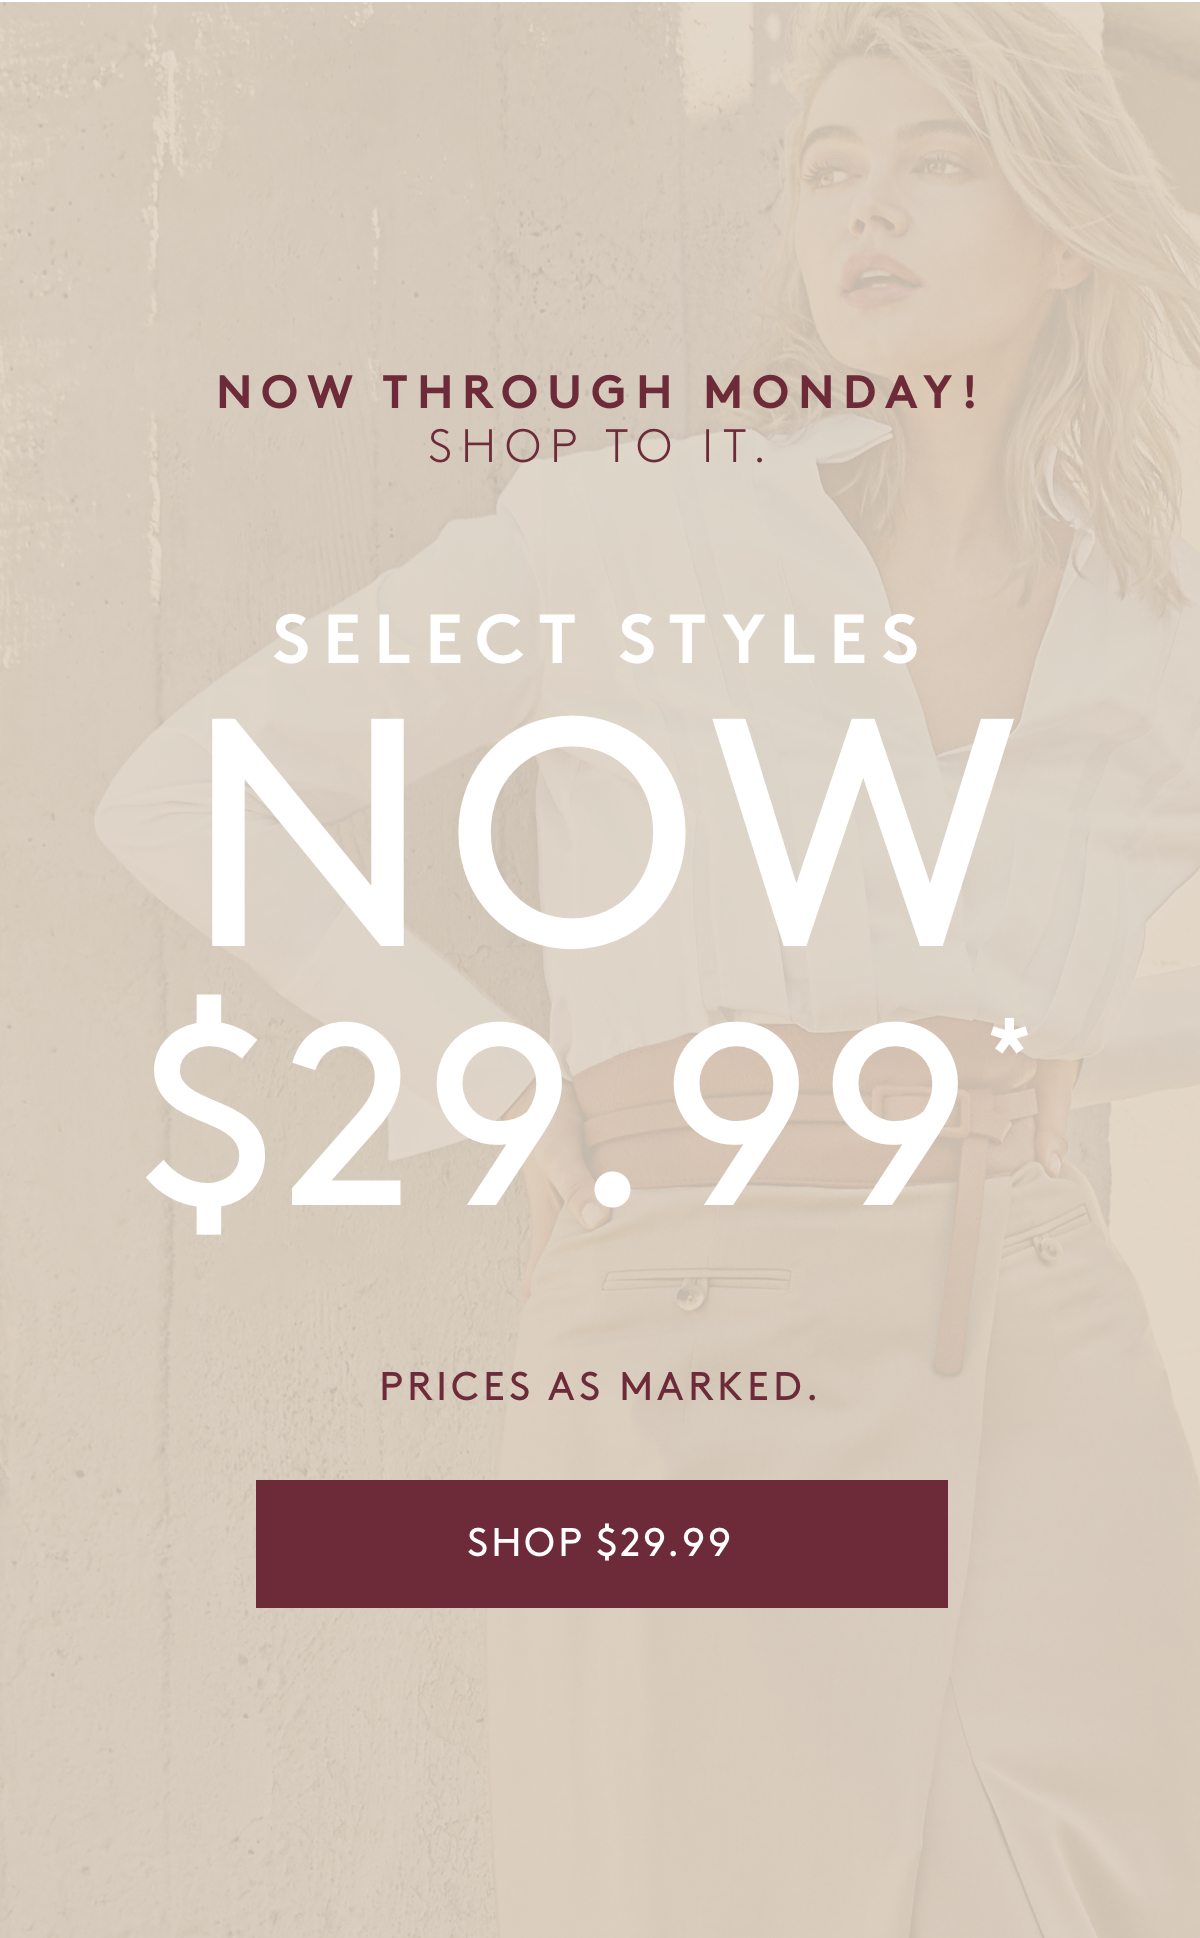 Now through Monday! Shop to it. SELECT STYLES NOW $29.99* Prices as marked. Shop $29.99